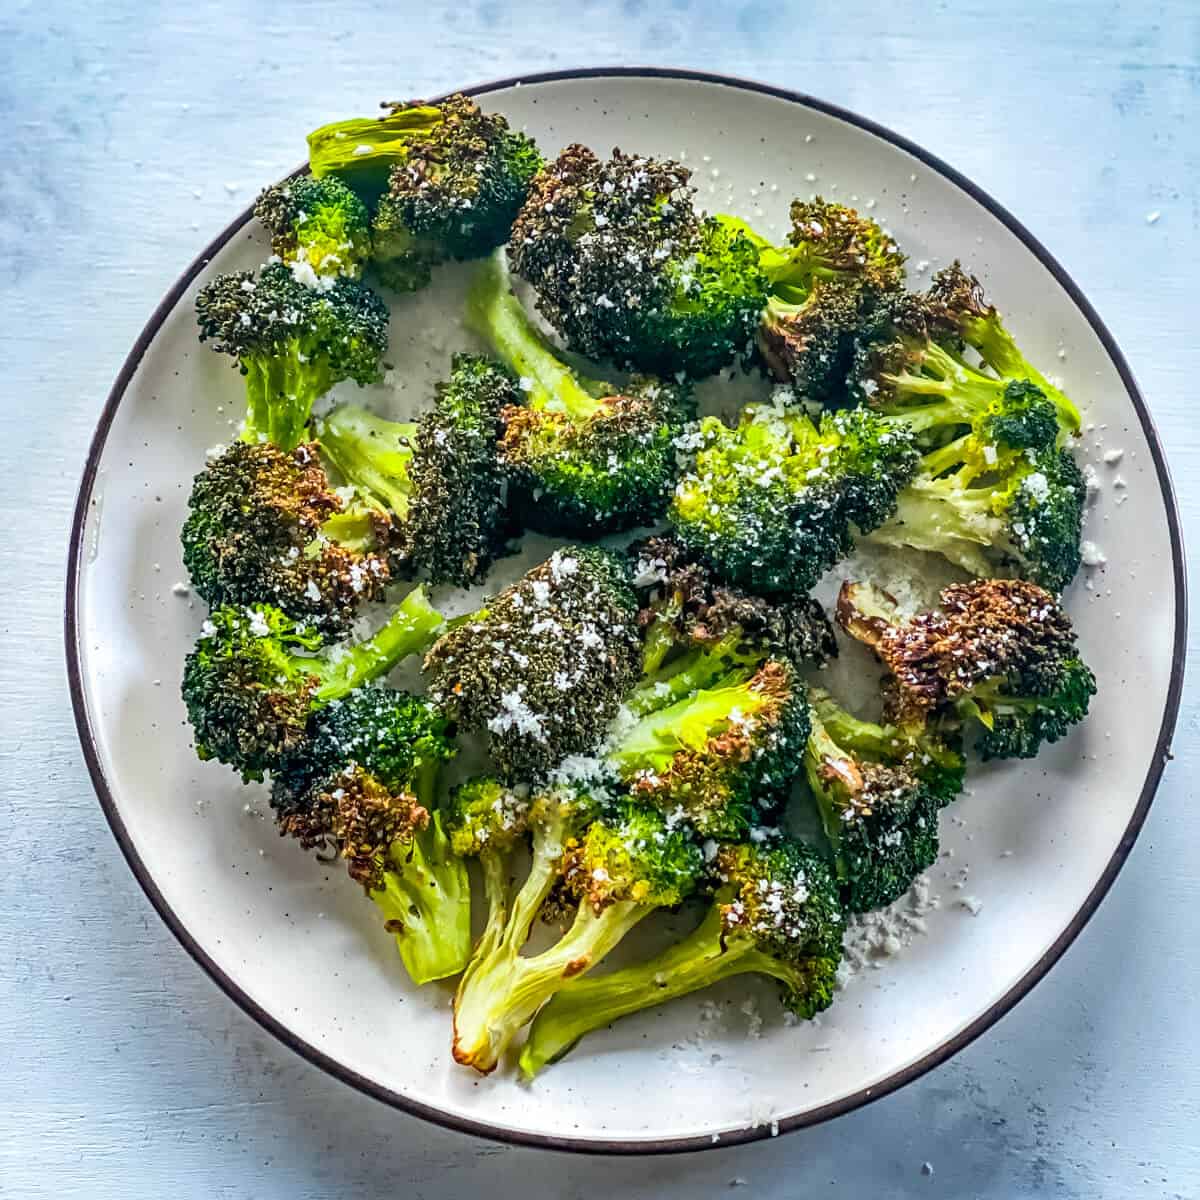 A white plate on a light blue background, holding a large amount of roasted broccoli florets.